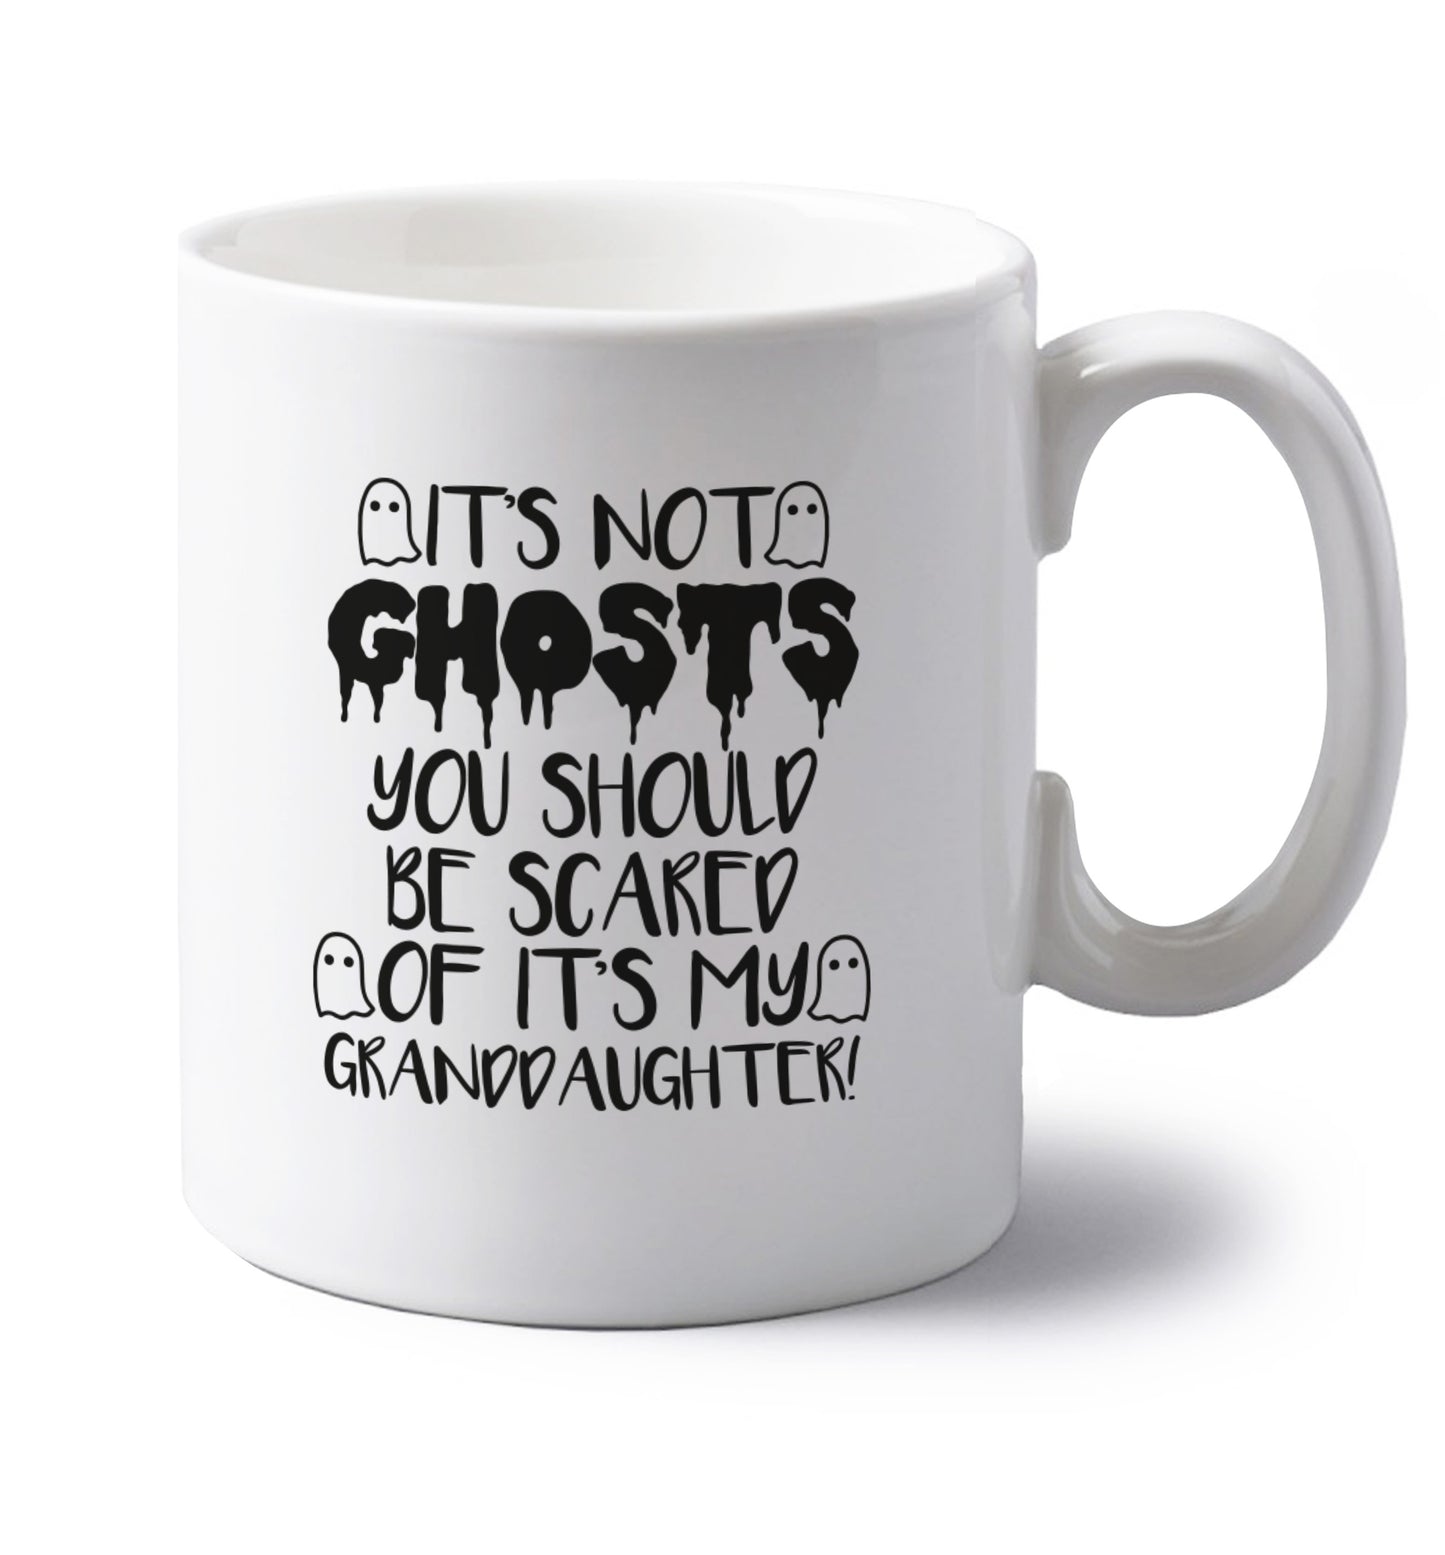 It's not ghosts you should be scared of it's my granddaughter! left handed white ceramic mug 